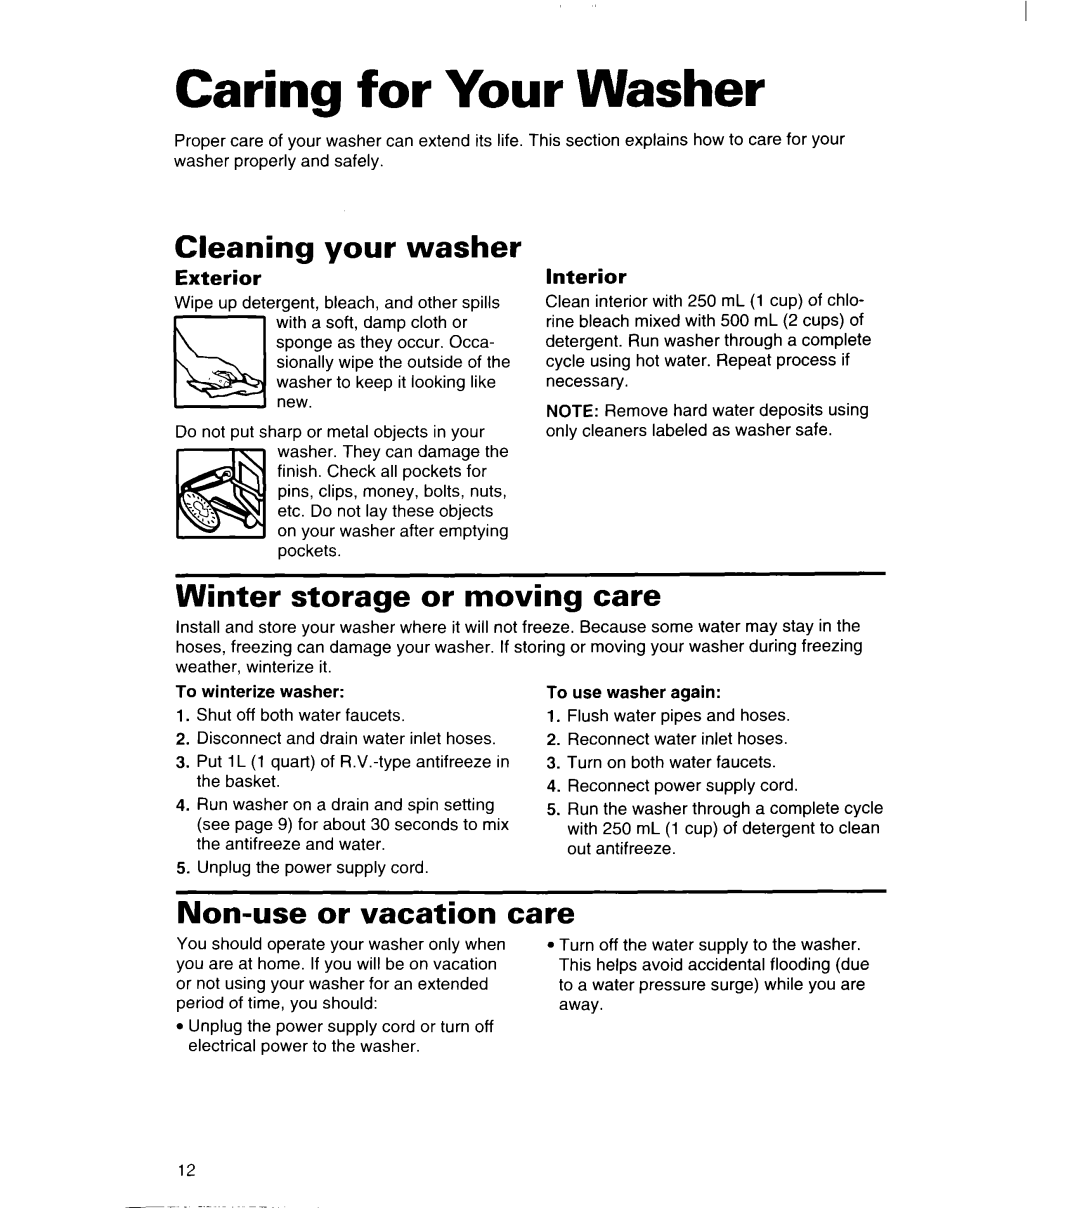 Whirlpool 3363834 Caring for Your Washer, Cleaning your washer, Winter storage or moving care, Non-use or vacation care 